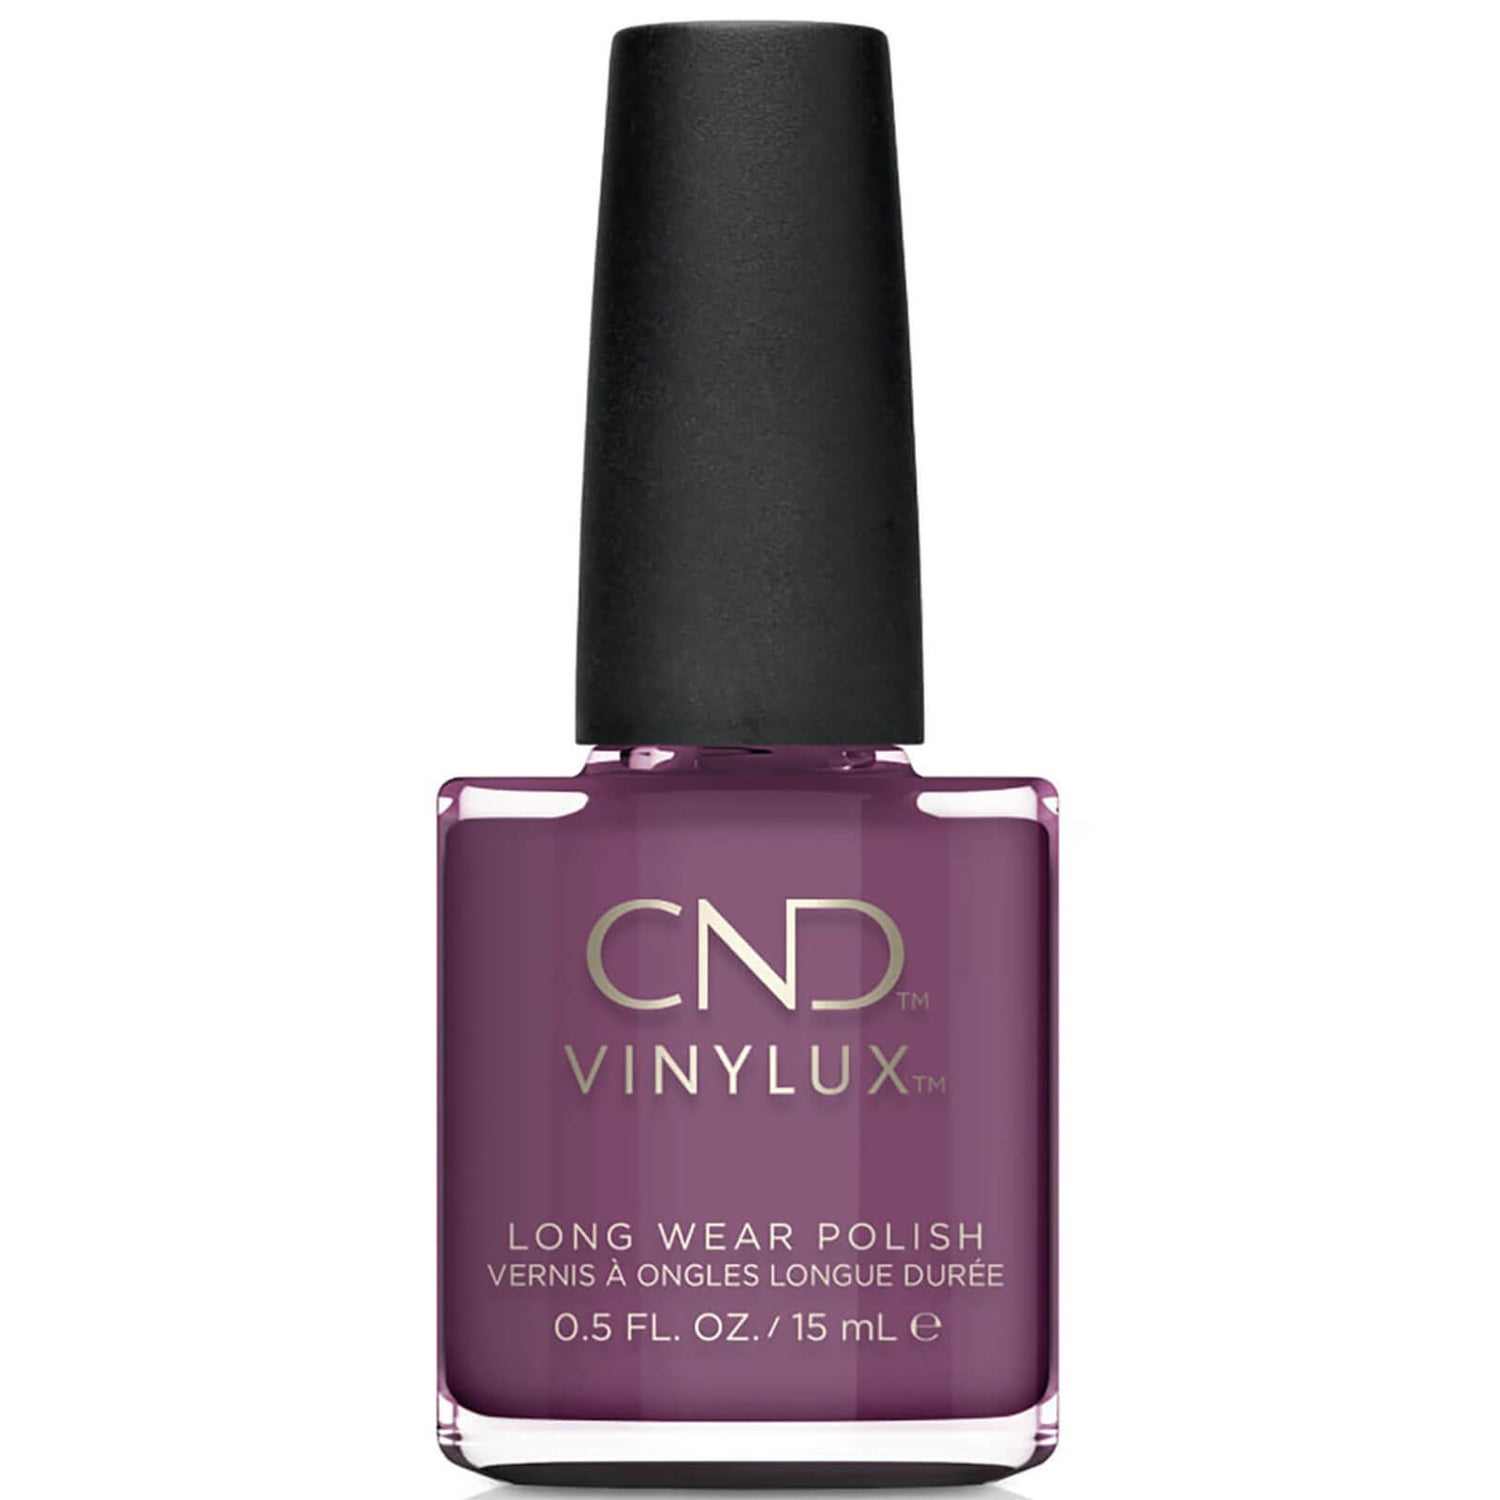 CND Vinylux Married to Mauve Nail Varnish 15ml